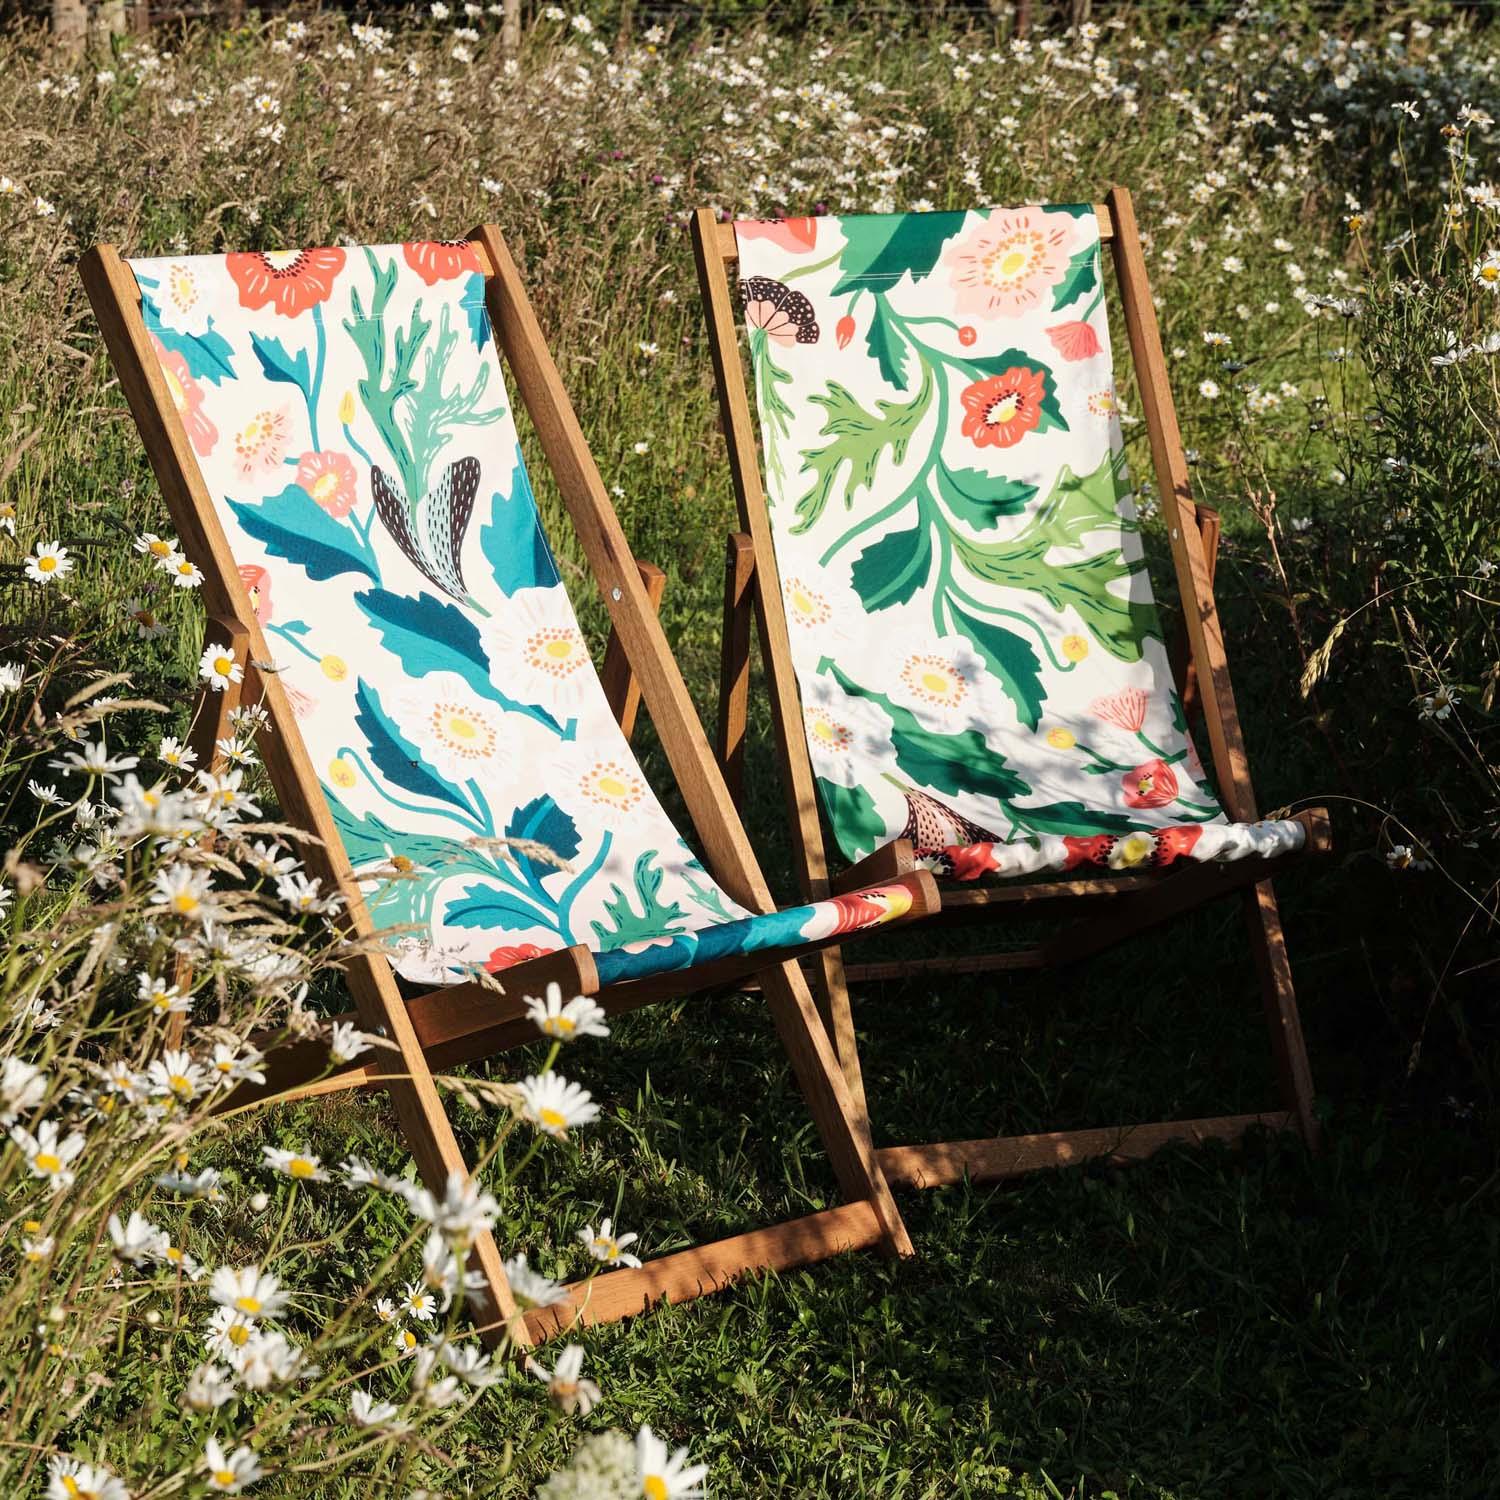 Exotic Floral Yellow - House Of Turnowsky  Deckchair